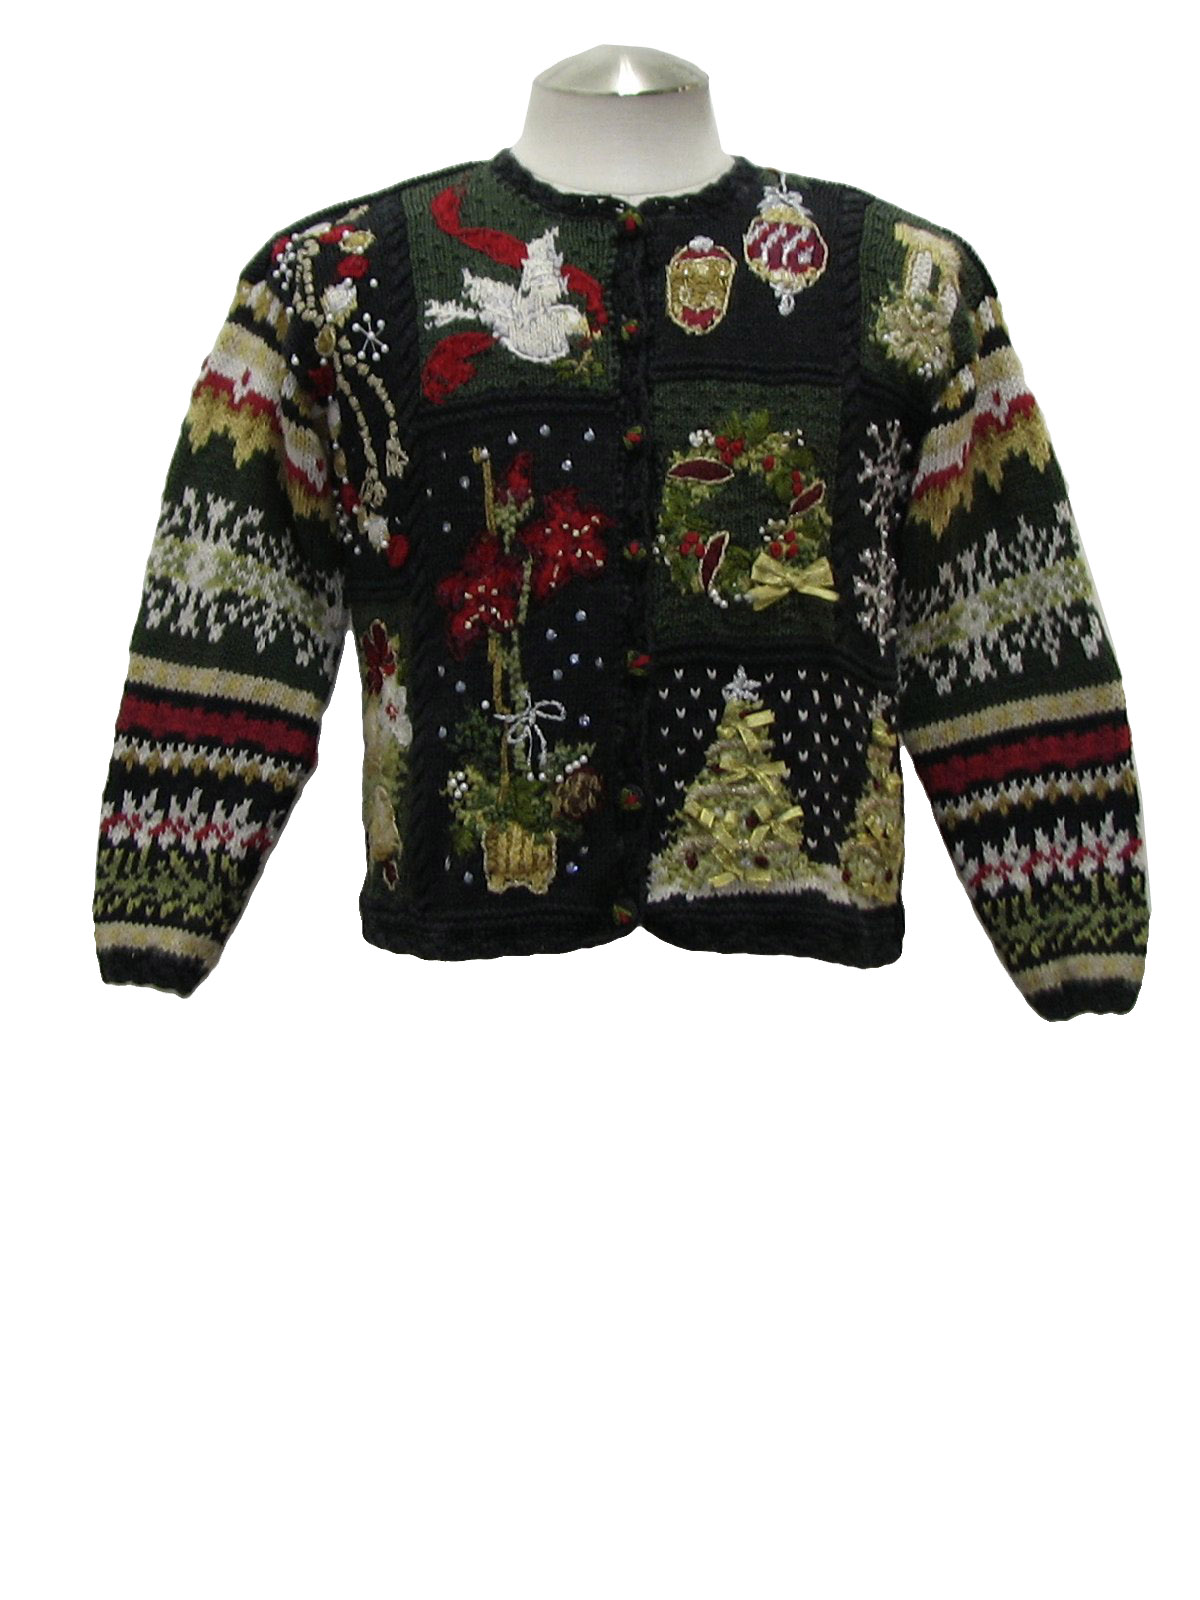 Womens Ugly Country Kitsch Christmas Sweater: -Tiara- Womens black ...